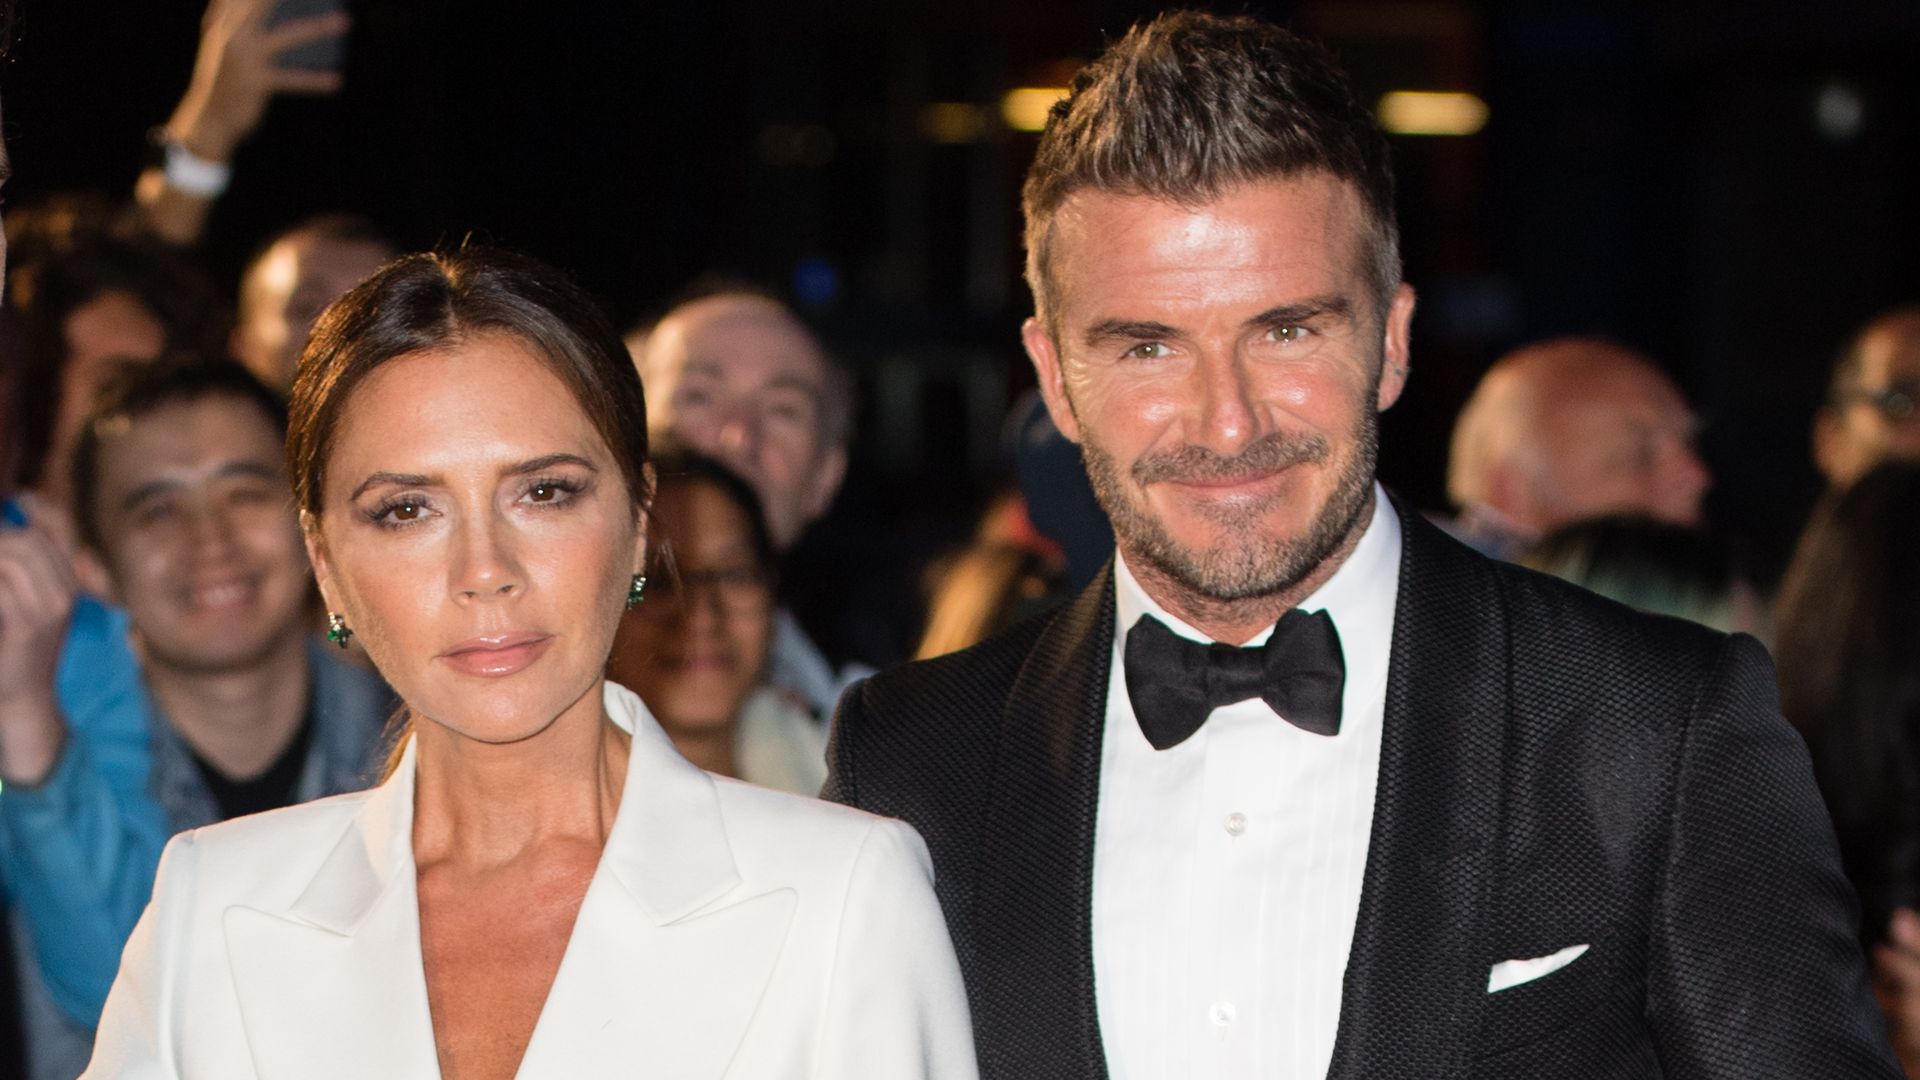 Father-of-the-groom David Beckham channels James Bond in family wedding photo